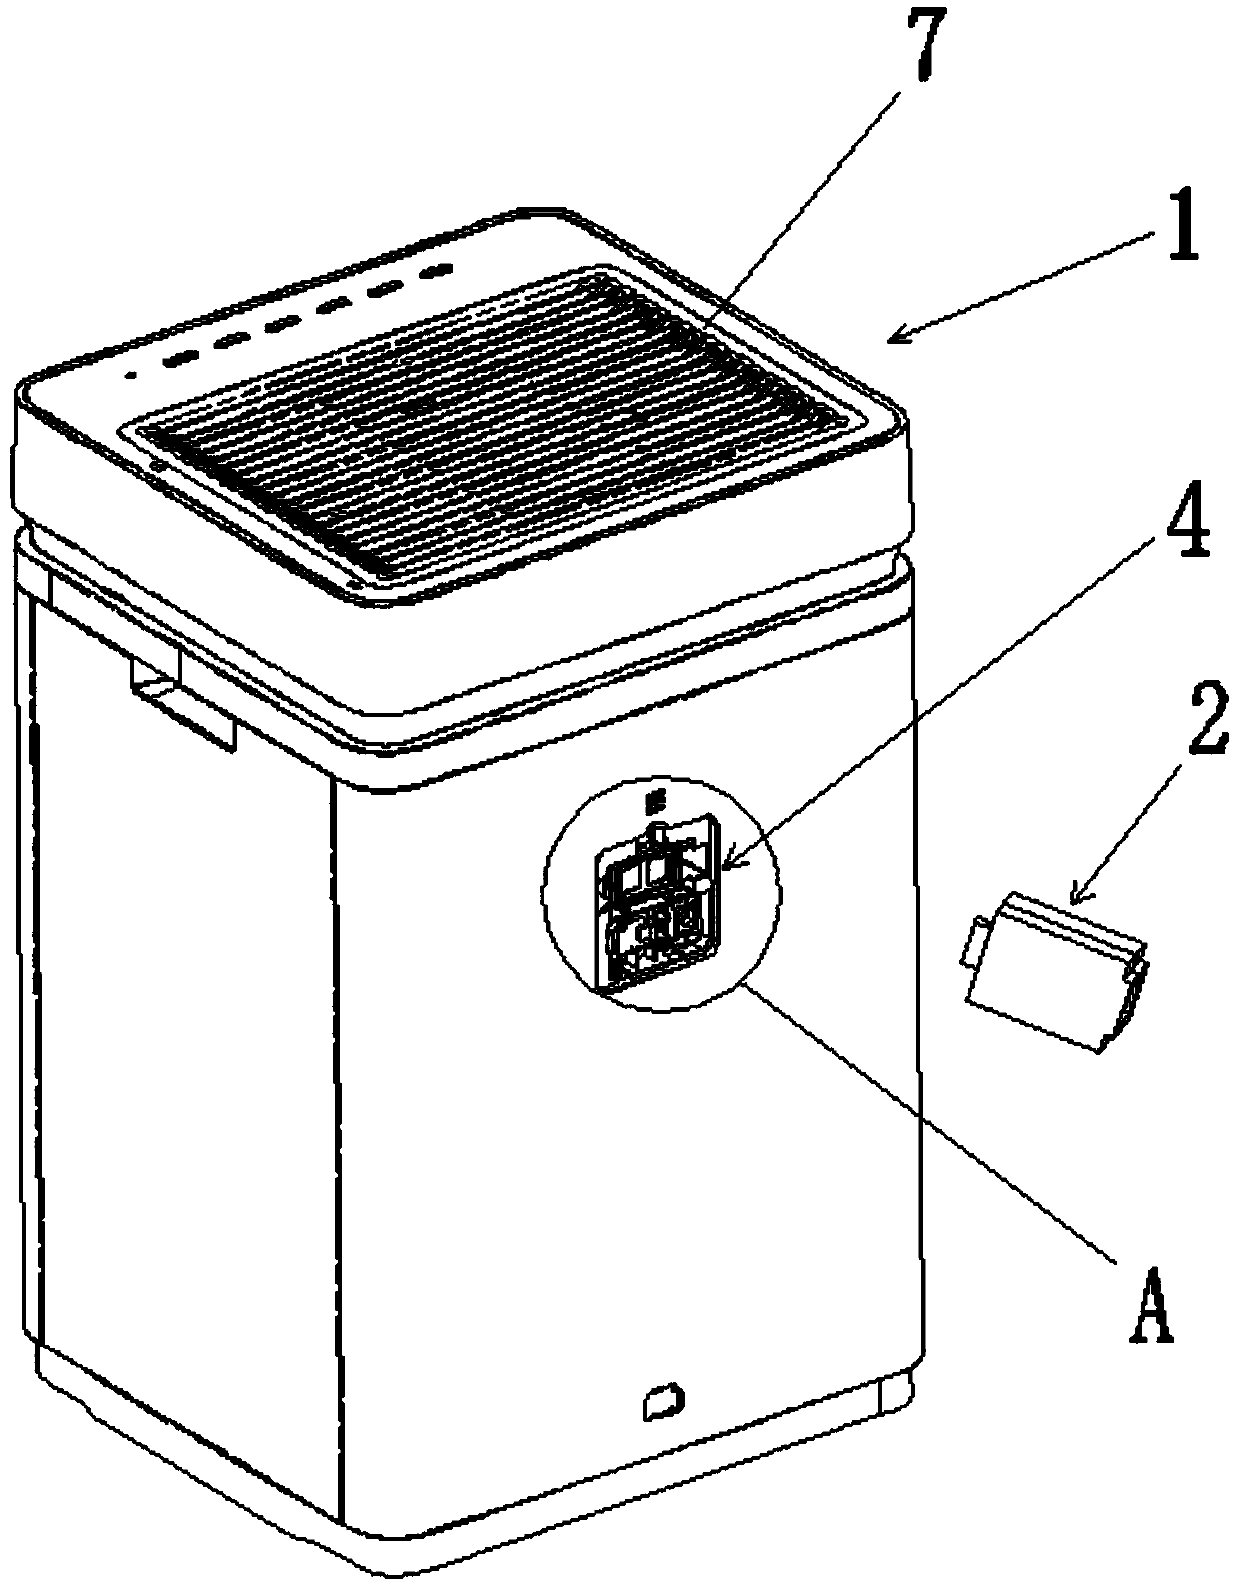 Air purifier with sensor for monitoring formaldehyde